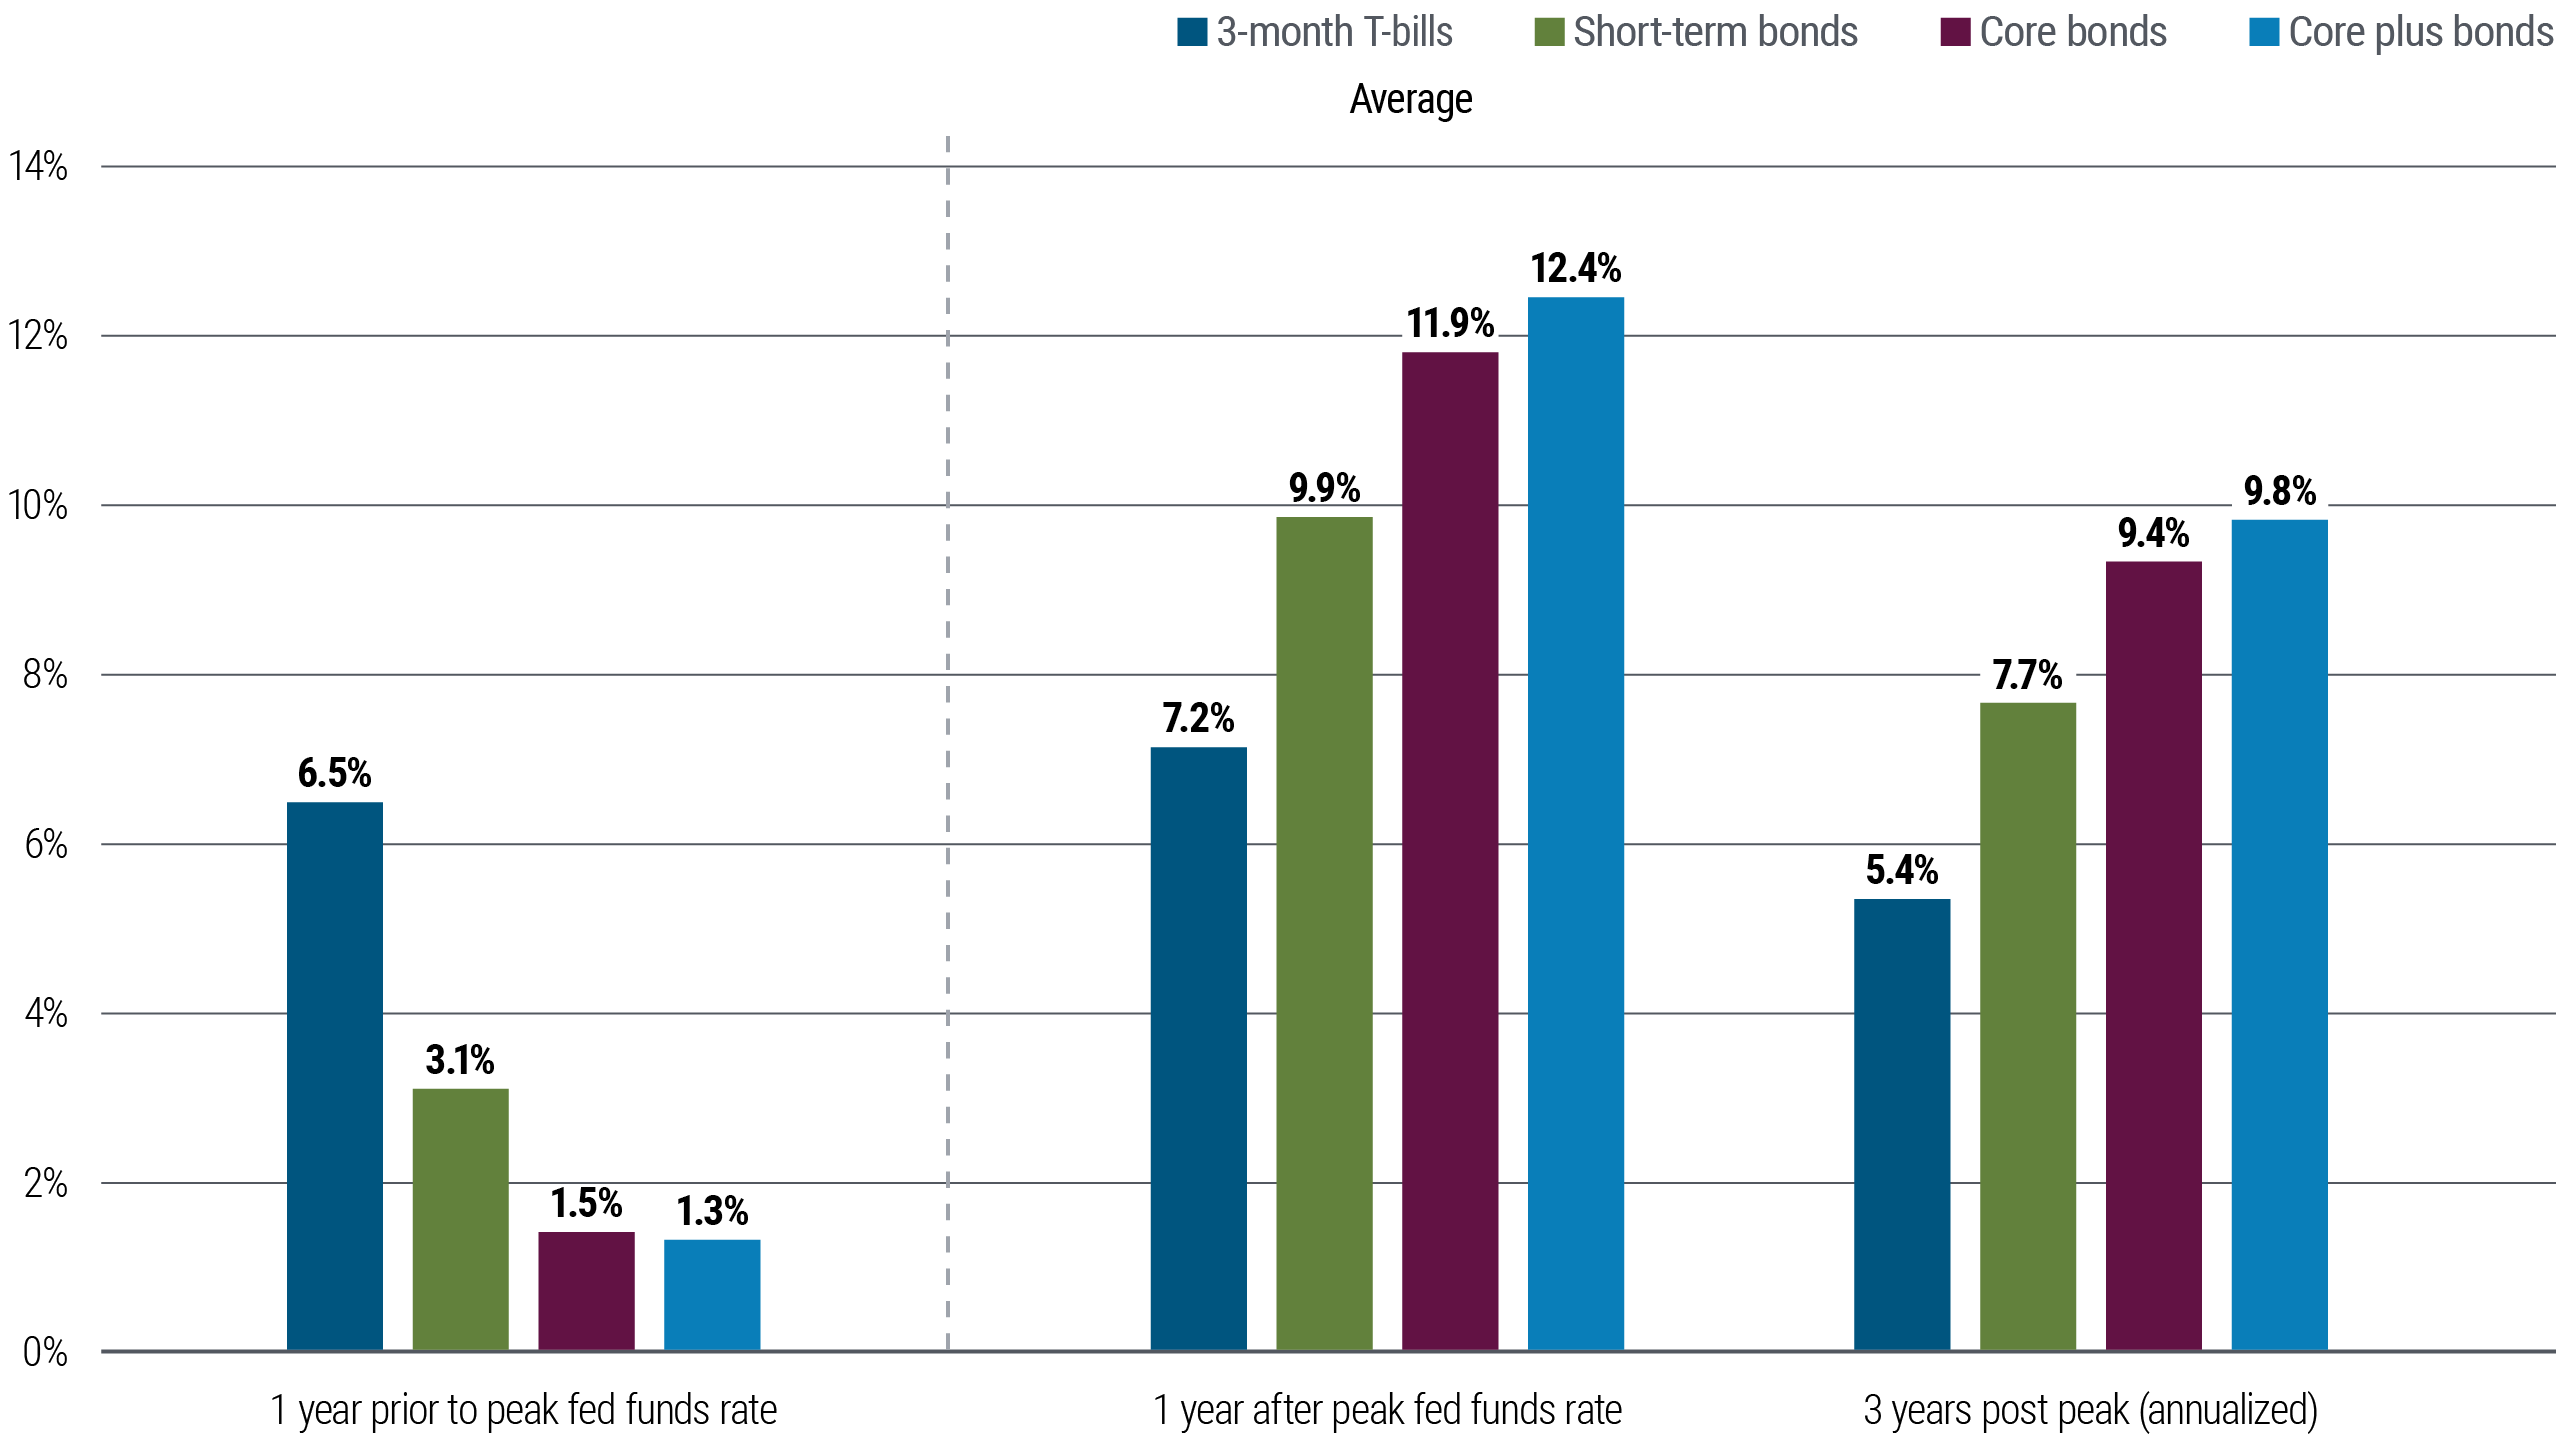 Figure 2 is a bar chart showing performance of 3-month T-bills, short term bonds, core bonds, and core plus bonds across Federal Reserve rate-hiking cycles. T-bills are proxied by the Citigroup index, and the other asset classes are proxied by Morningstar categories. The first of three sets of bars shows performance one year prior to the peak federal funds rate, with T-bills outperforming the other asset classes. The second set shows performance one year after the peak fed funds rate, and the third shows annualized performance for three years post-peak rate. In both of those scenarios, all categories of bonds outperform T-bills, led by core-plus strategies. Hiking cycles are defined as periods where the Federal Reserve embarks on a sustained path of increasing the target fed funds rate and/or target range. We define the end of a hiking cycle as the month where the Fed reaches its peak policy rate or range for that cycle. Hiking cycles encompassed began in 1980, 1983, 1988, 1994, 1999, 2004, and 2015.